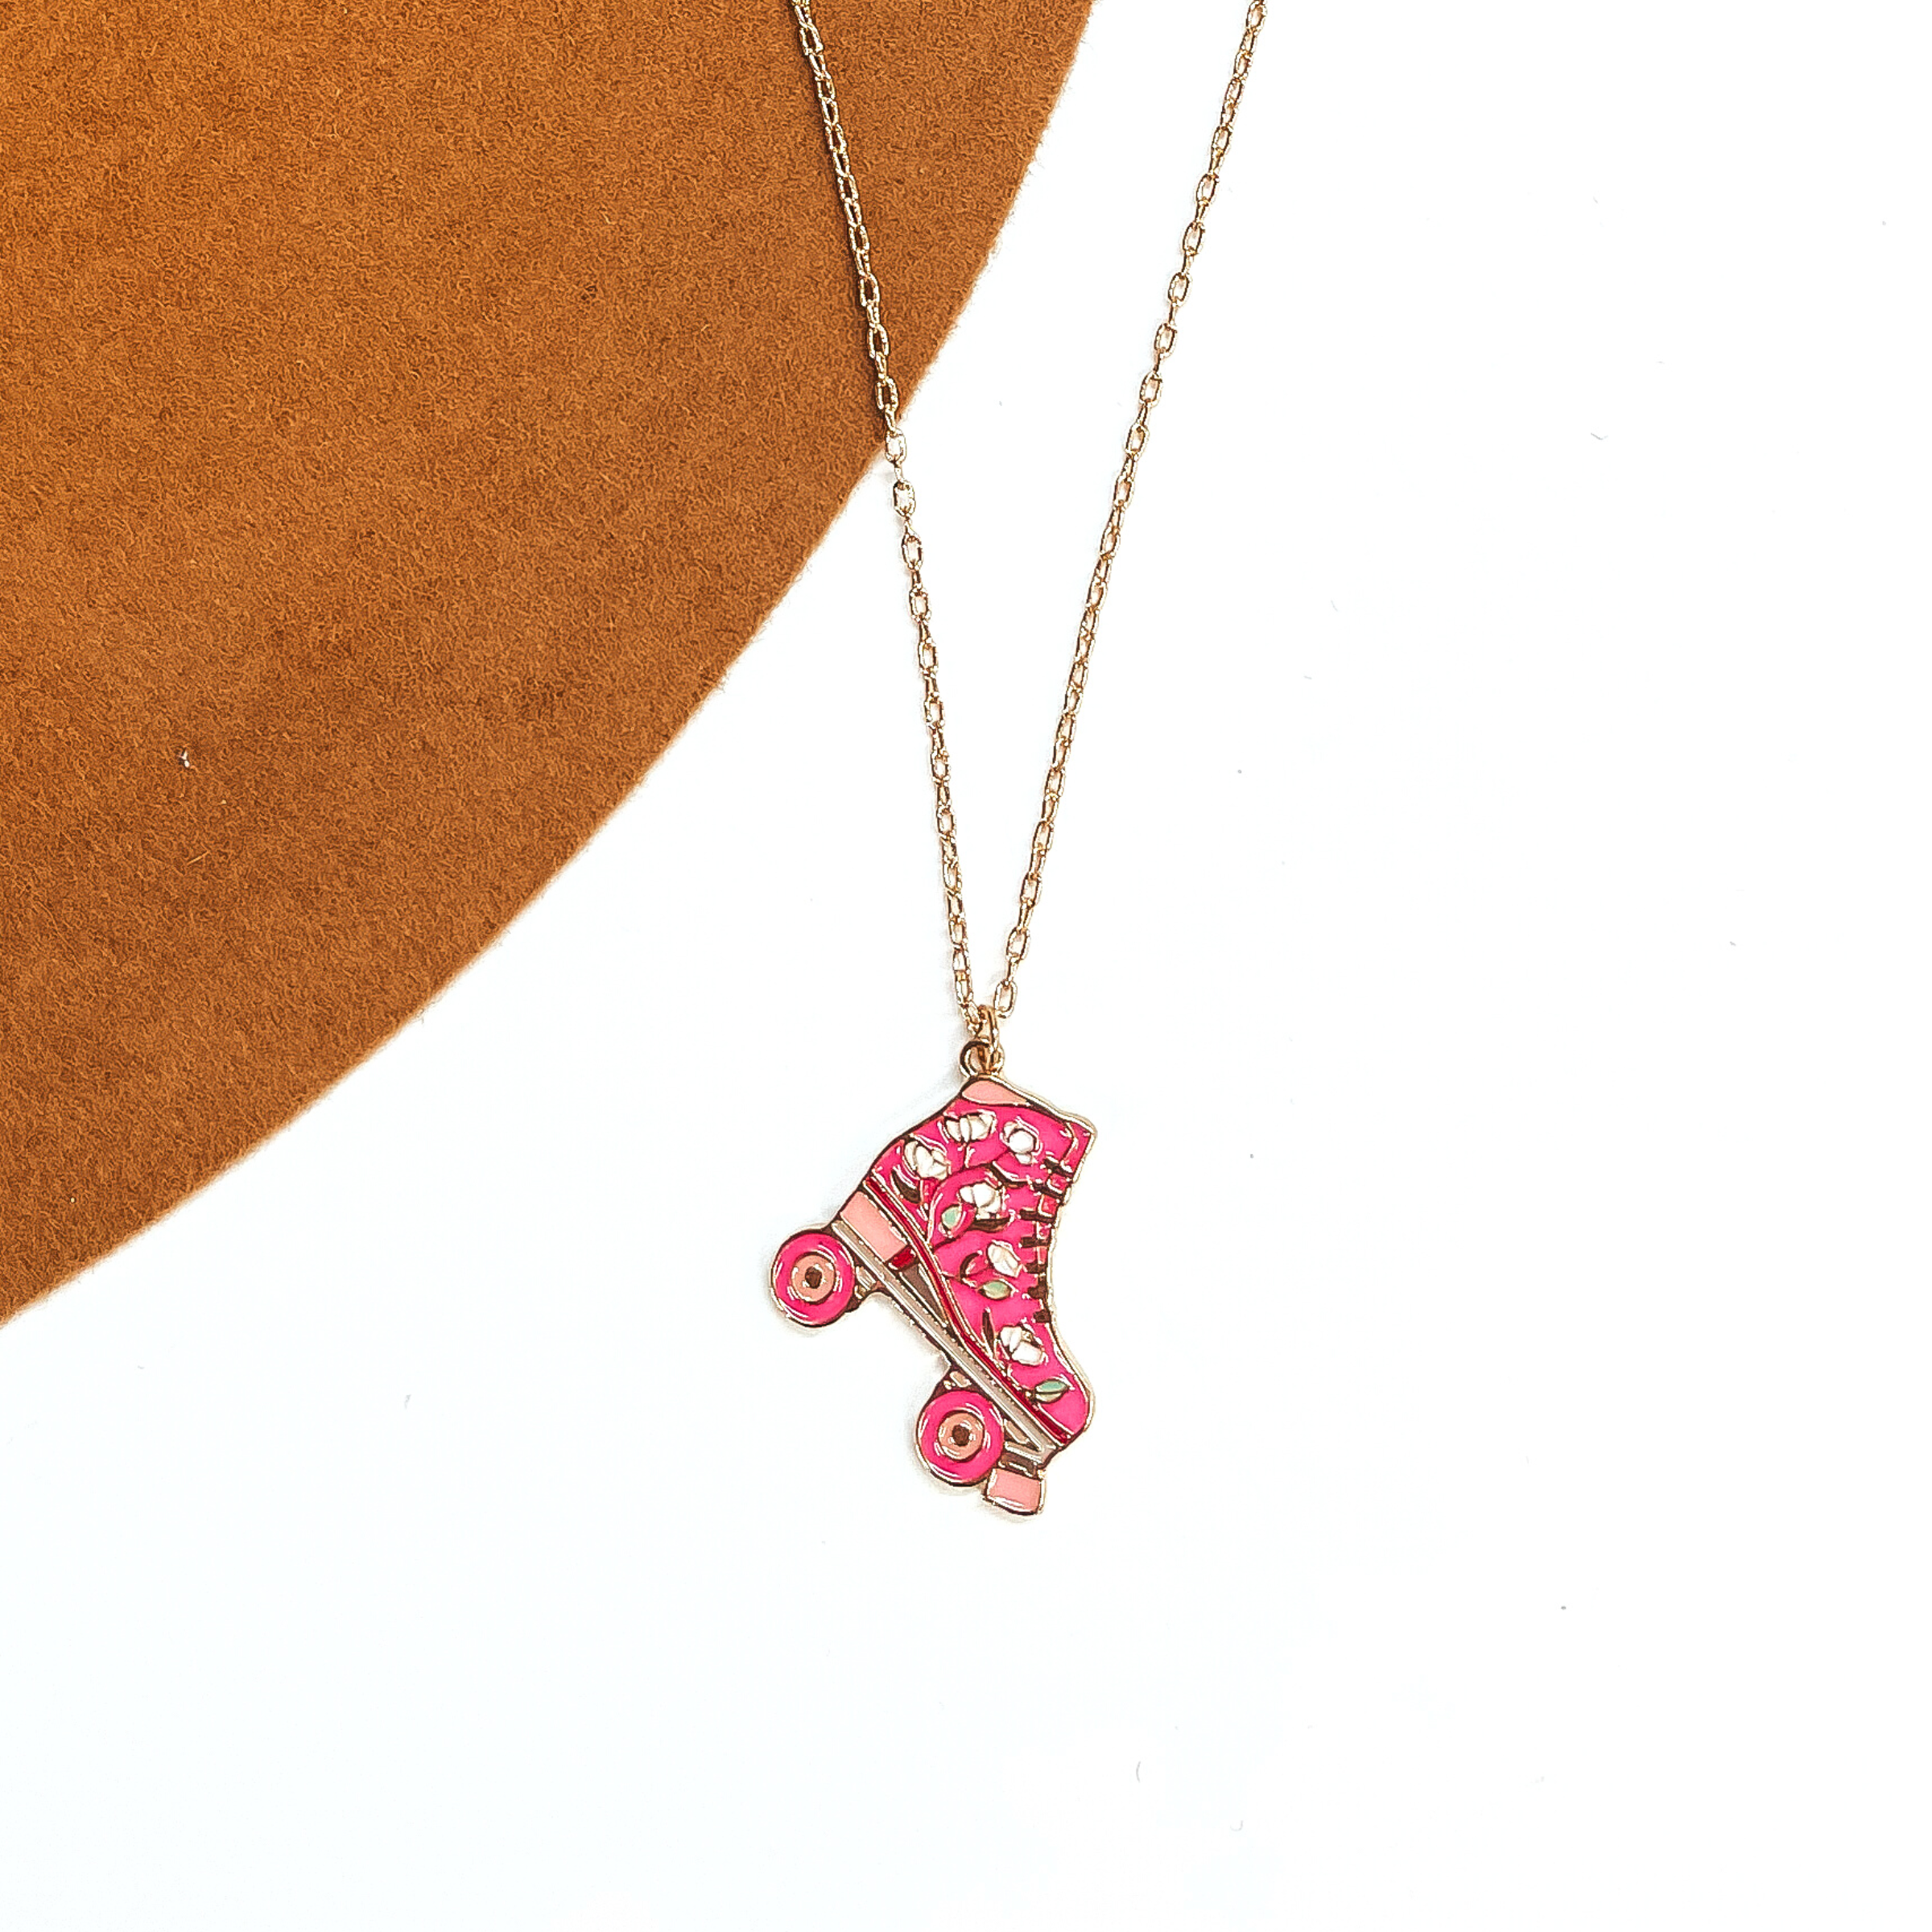 Gold thin chain necklace with a pink rollerskate pendant. The pink rollerskate has  white floral design in the center with different shades of pink. This necklace is taken  laying on a camel-brown, felt hat brim and on a white background.